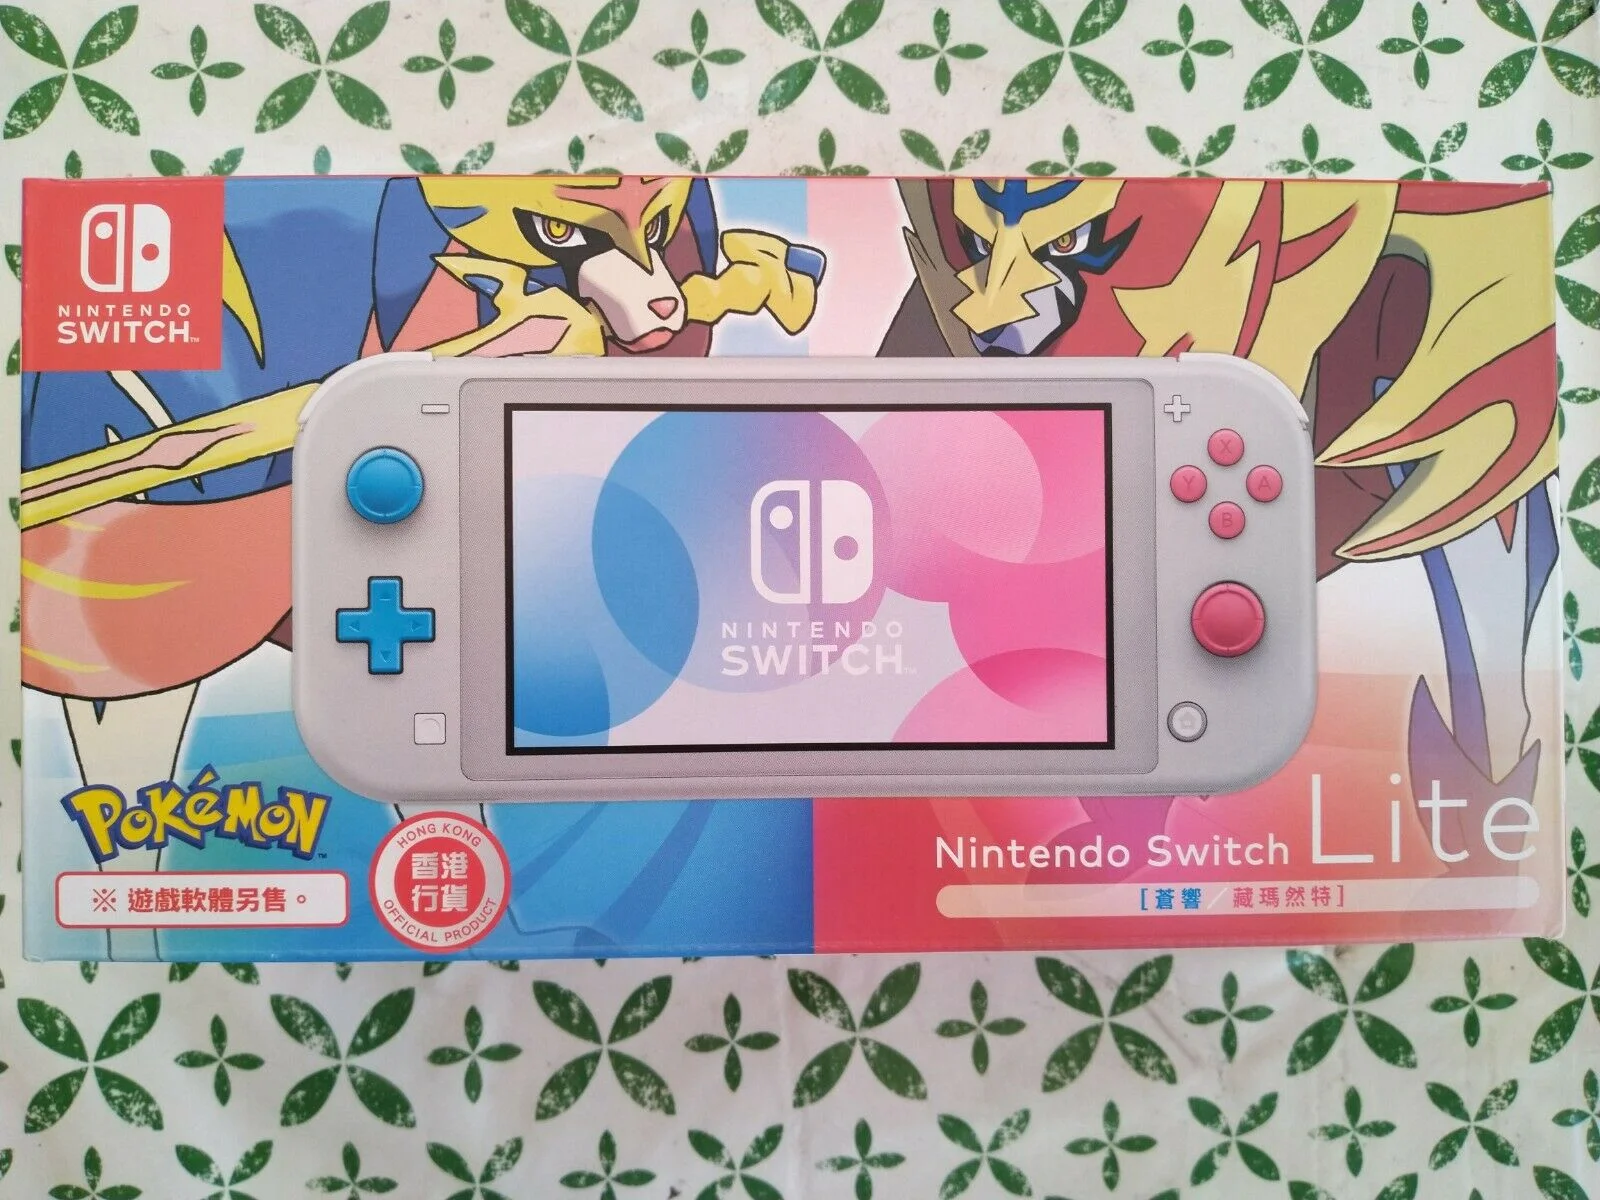  Nintendo Switch Lite Sword and Shield Console [HK]